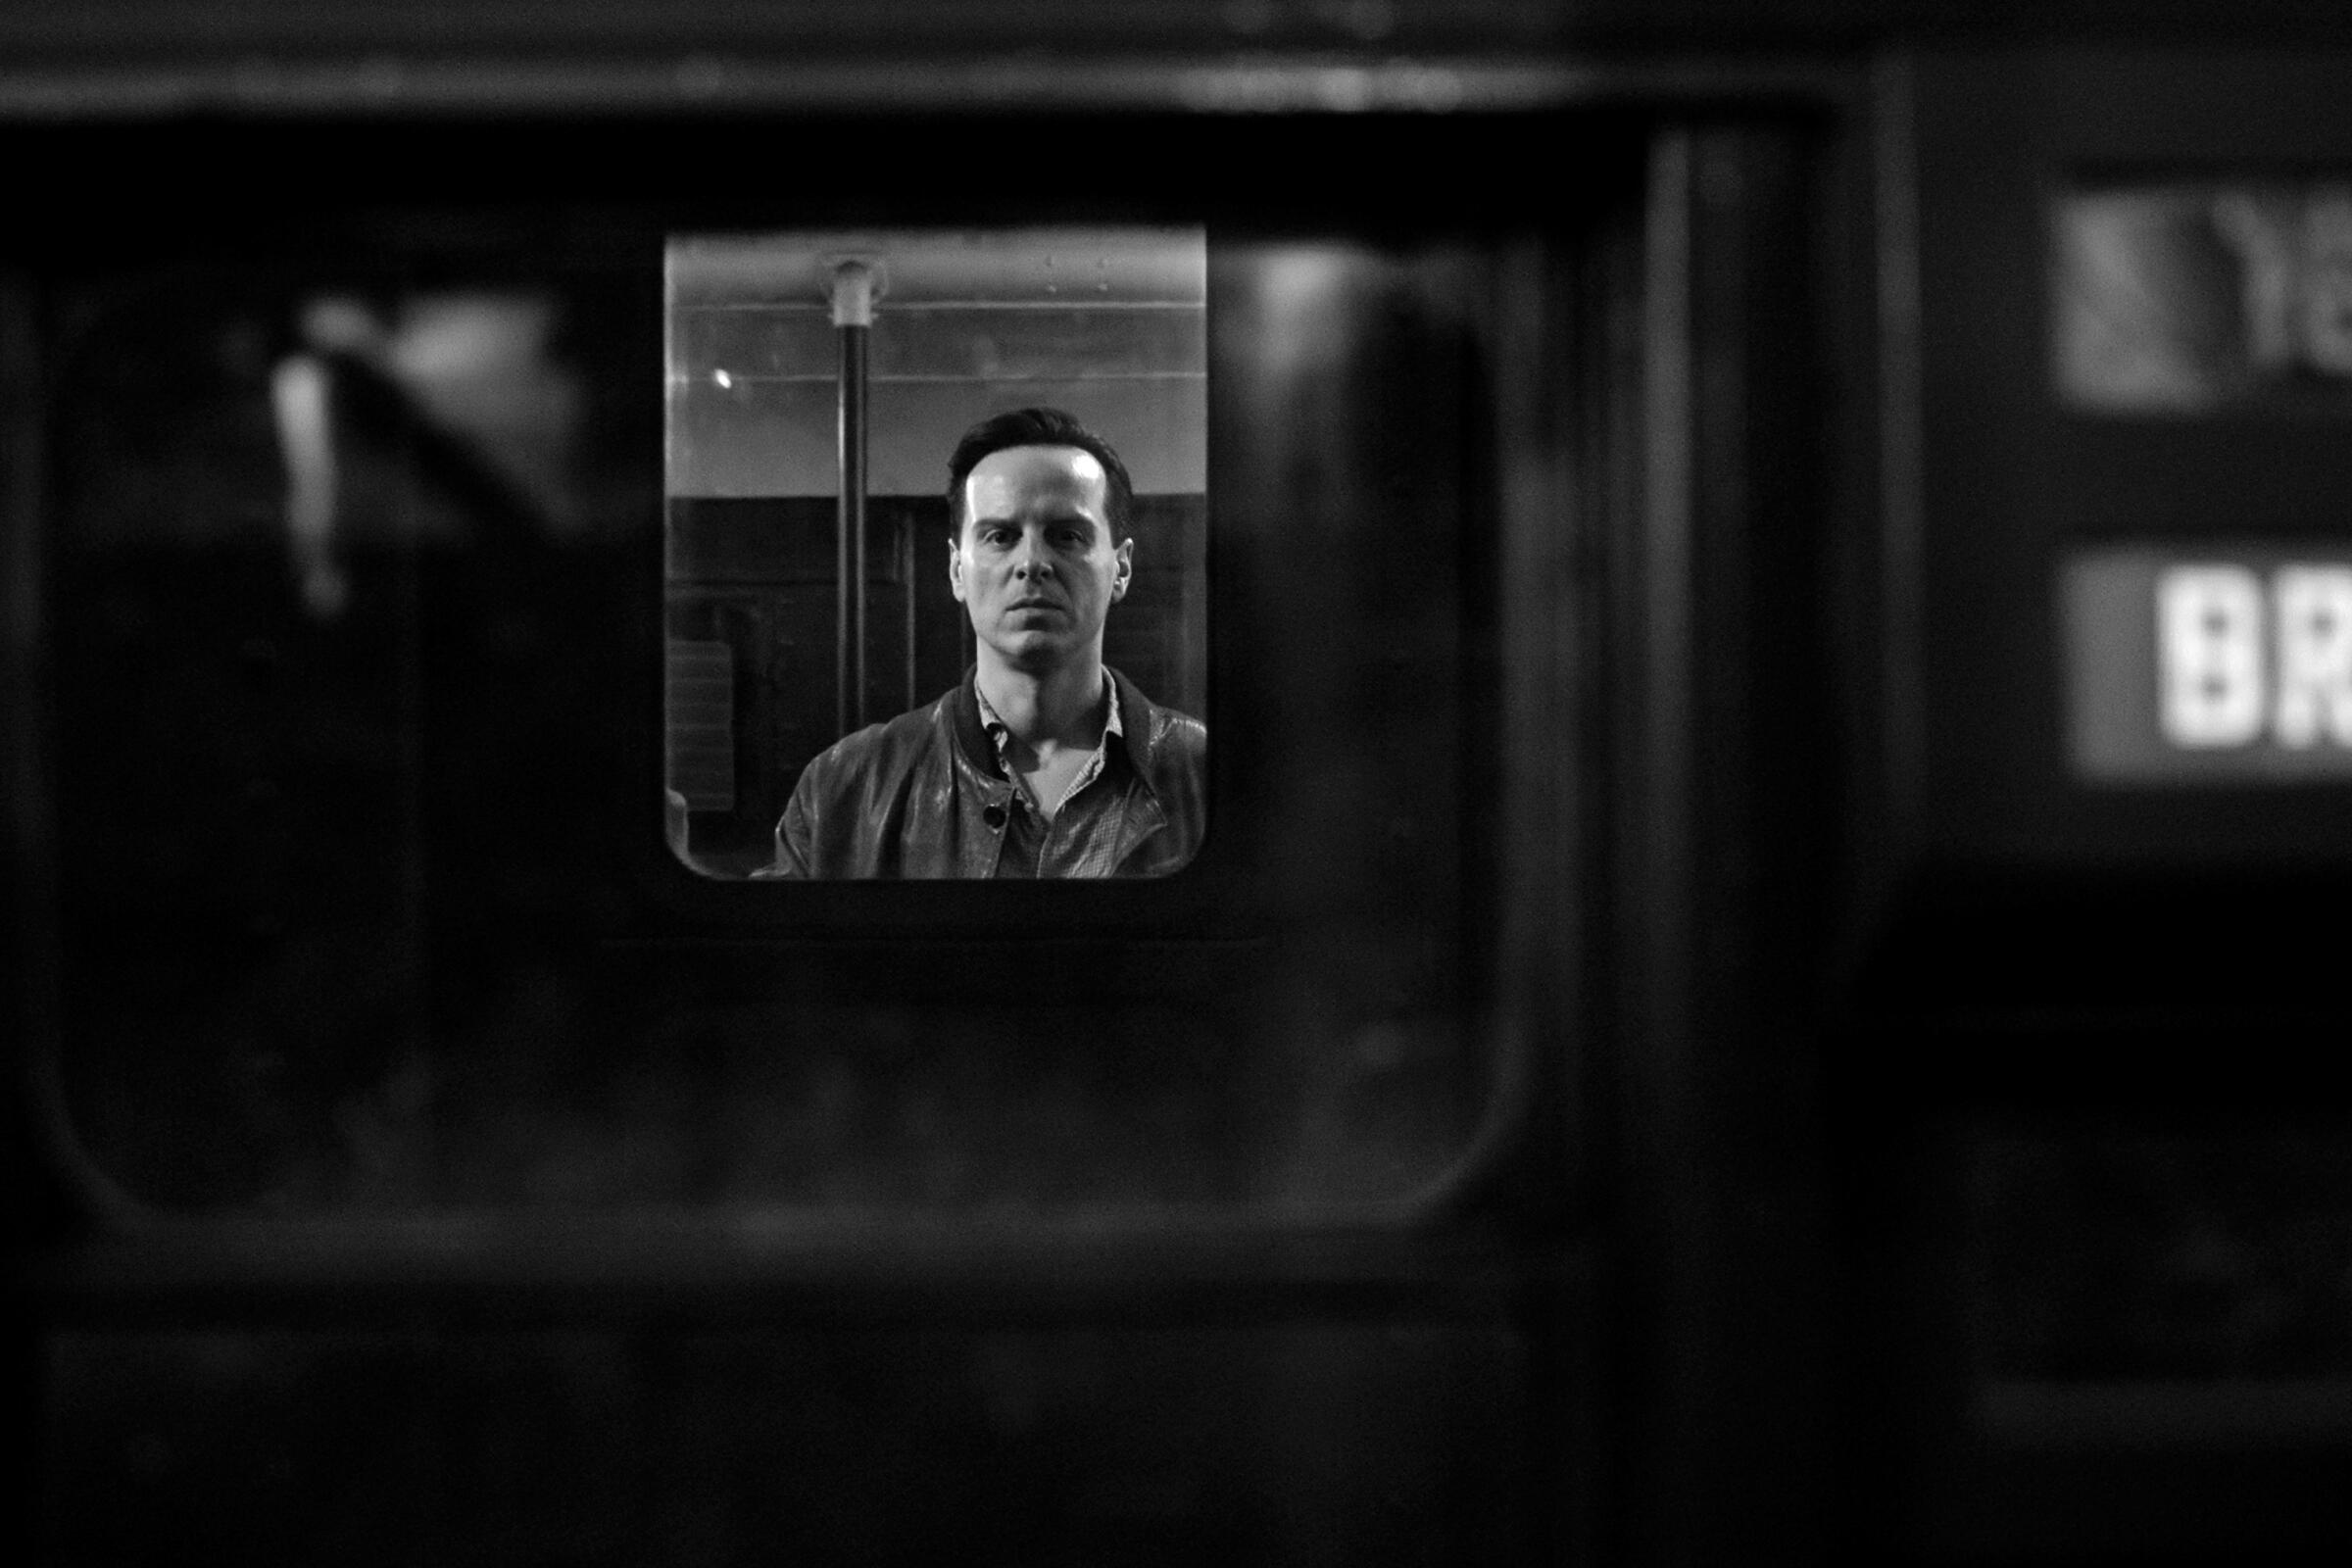 In a black-and-white image, a man stands inside a train looking out the window in "Ripley."